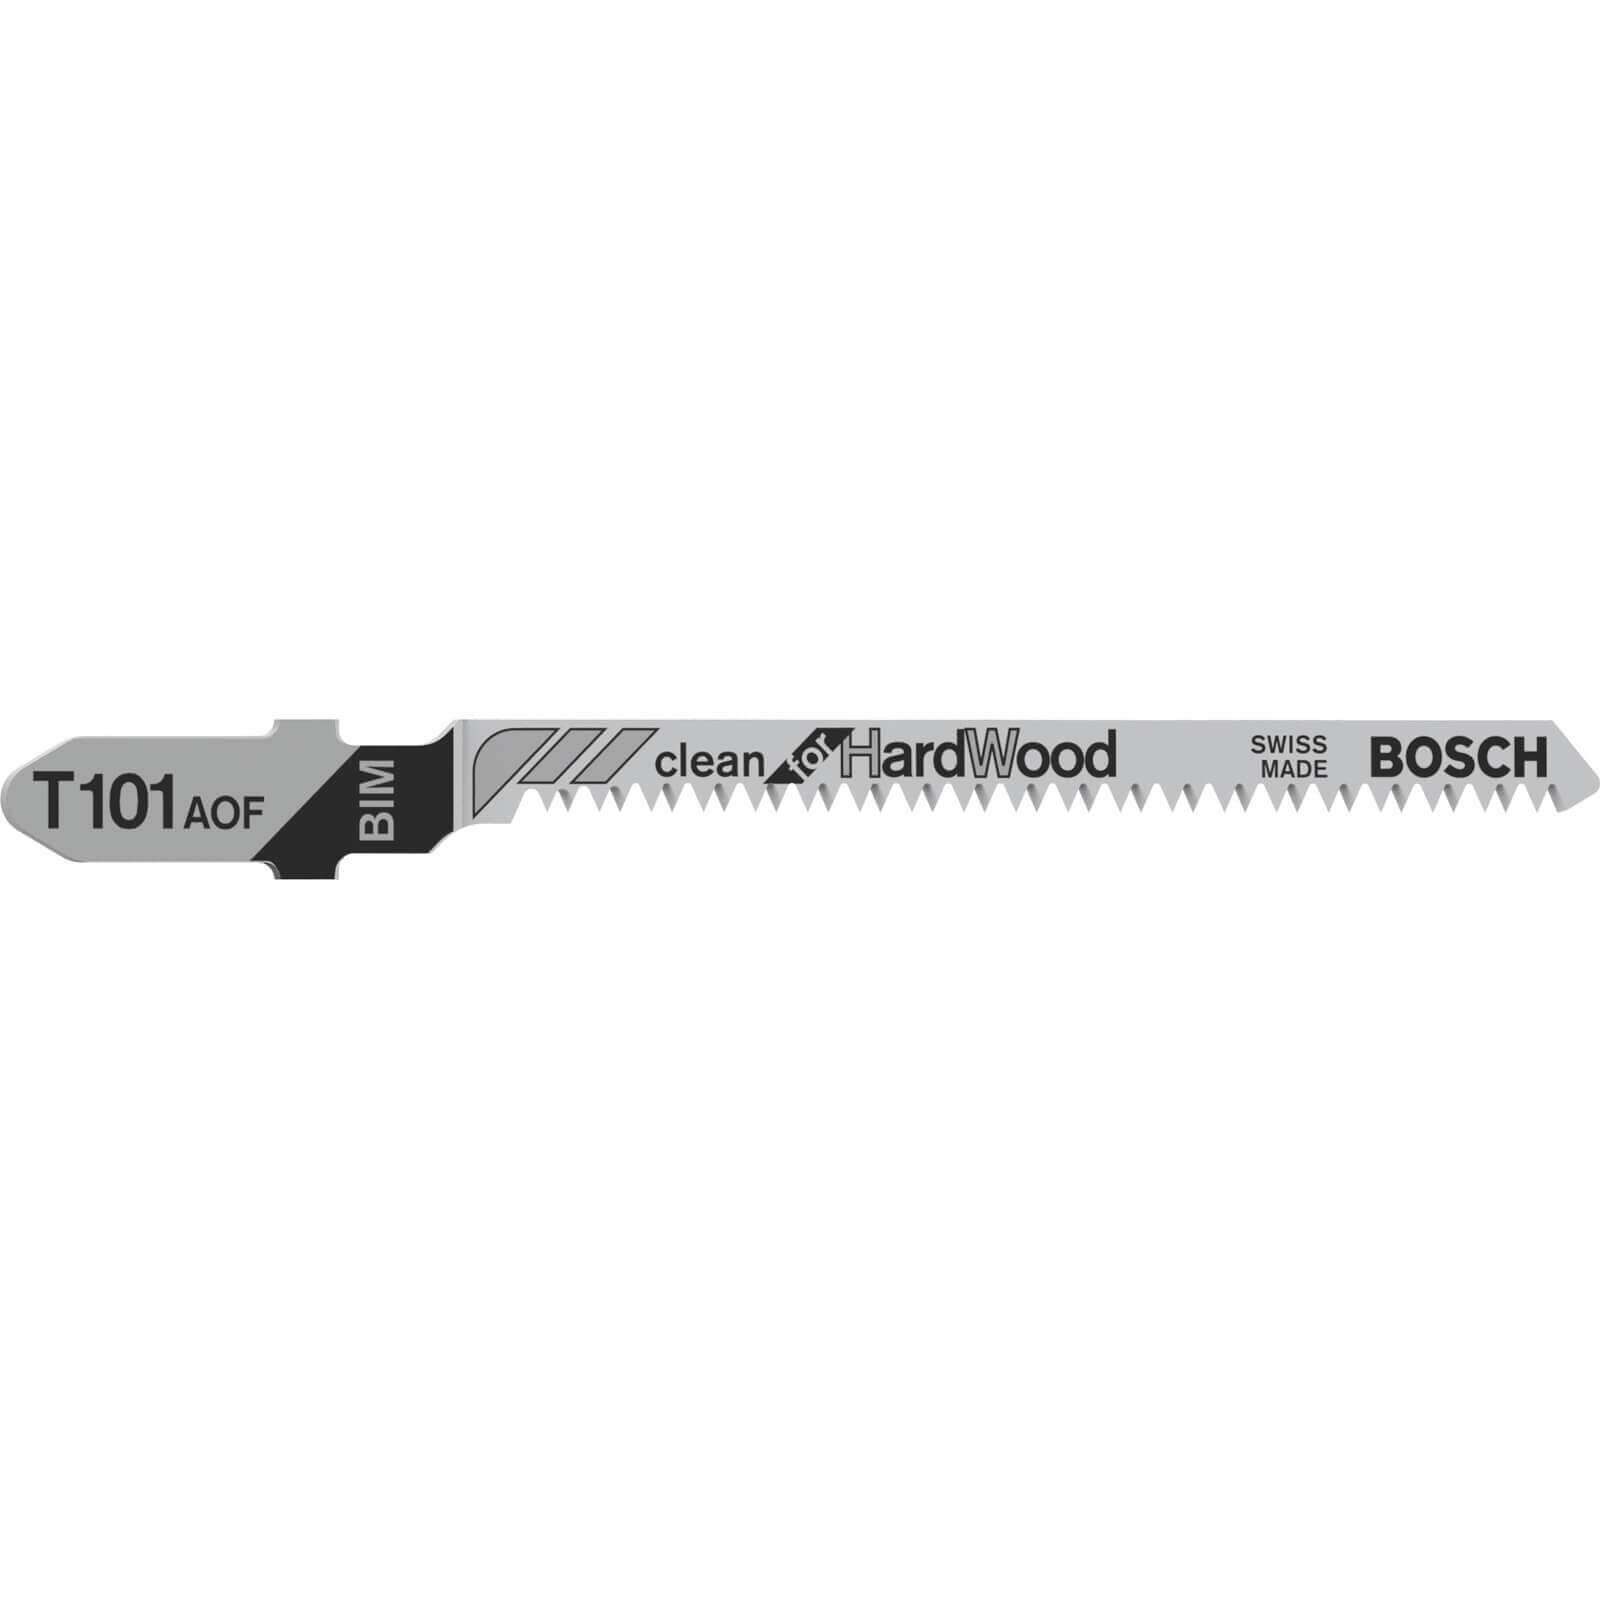 Image of Bosch T101 AOF Hard Wood Cutting Jigsaw Blades Pack of 5